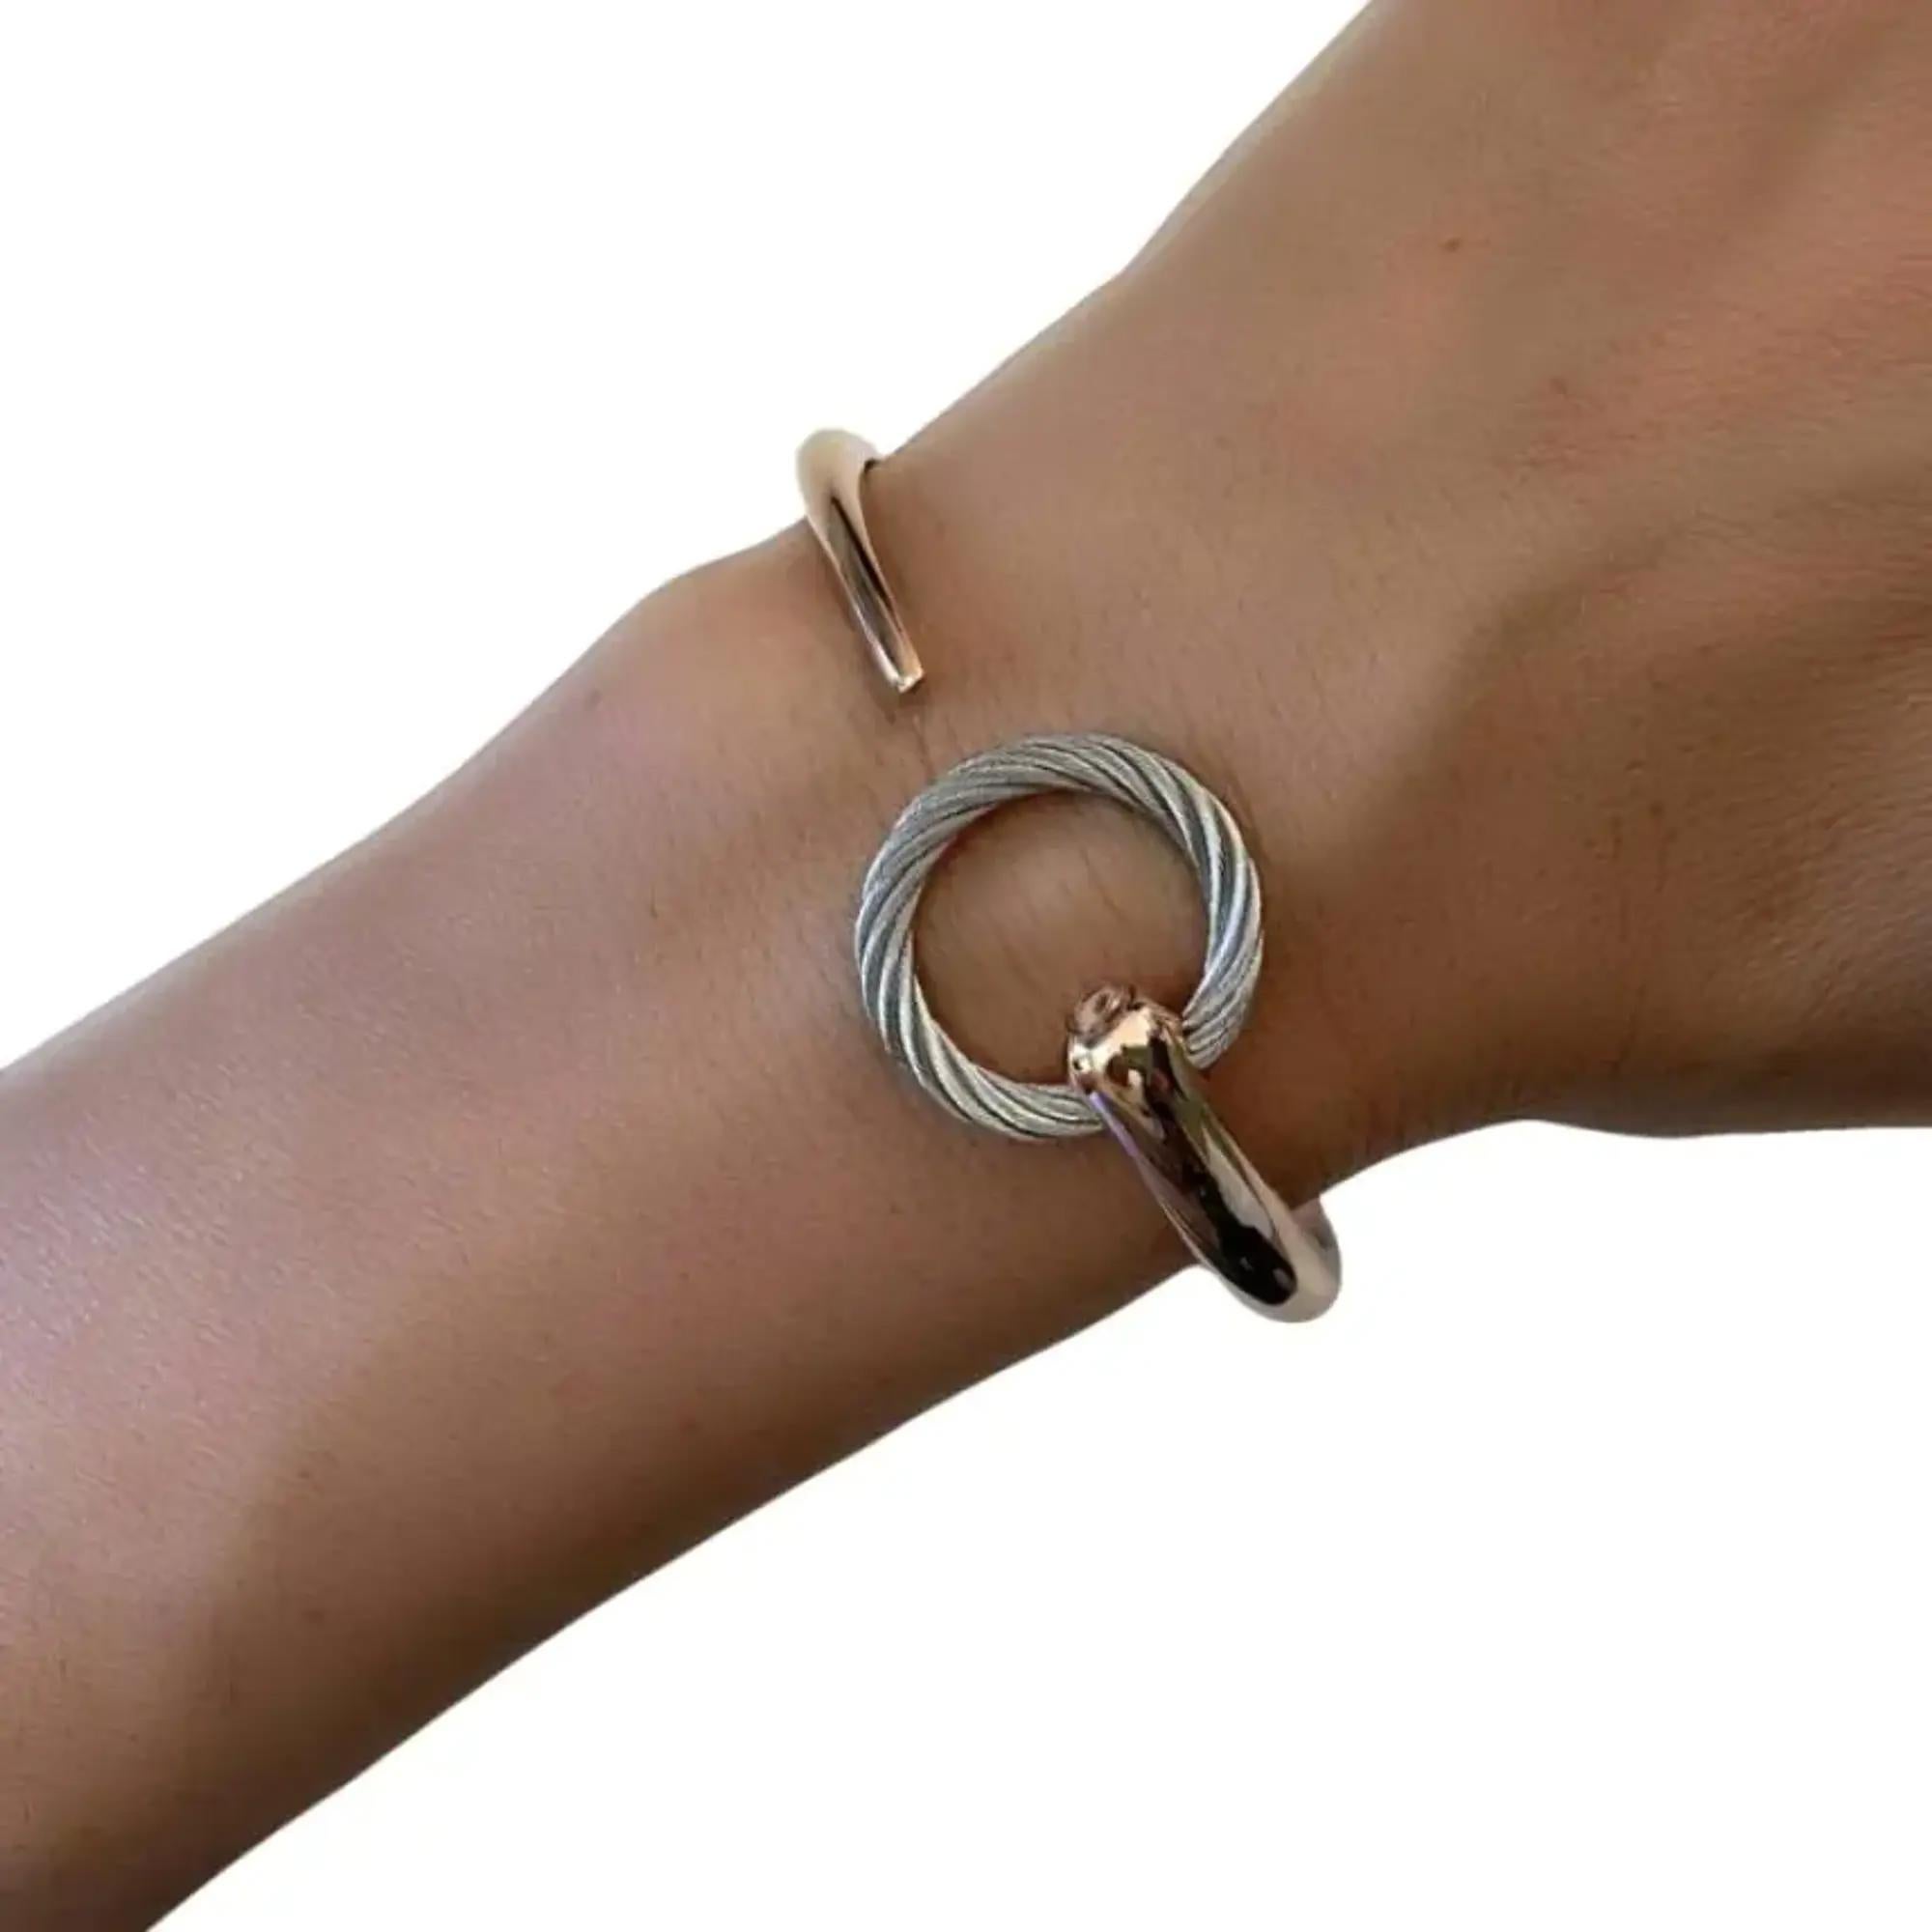 Charriol Infinity Zen Rose Gold PVD Steel Cable Bangle 04-102-1232-0 Size M For Sale 1